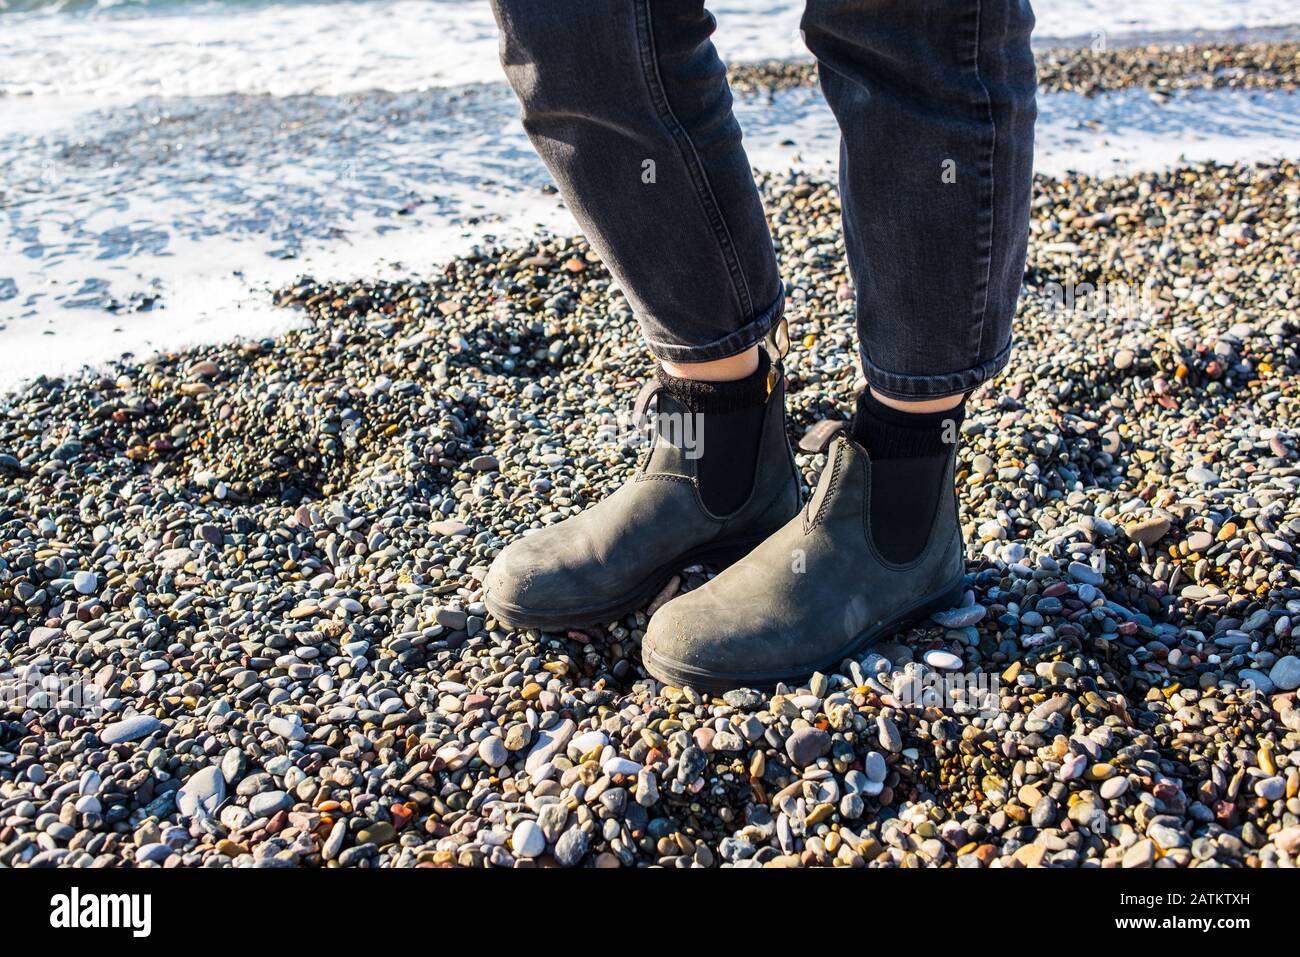 Chelsea boots classic black leather rubber sole. Focus on legs of hipster woman wearing denim black trousers. Shot on gravel beach with sea in backgro Stock Photo